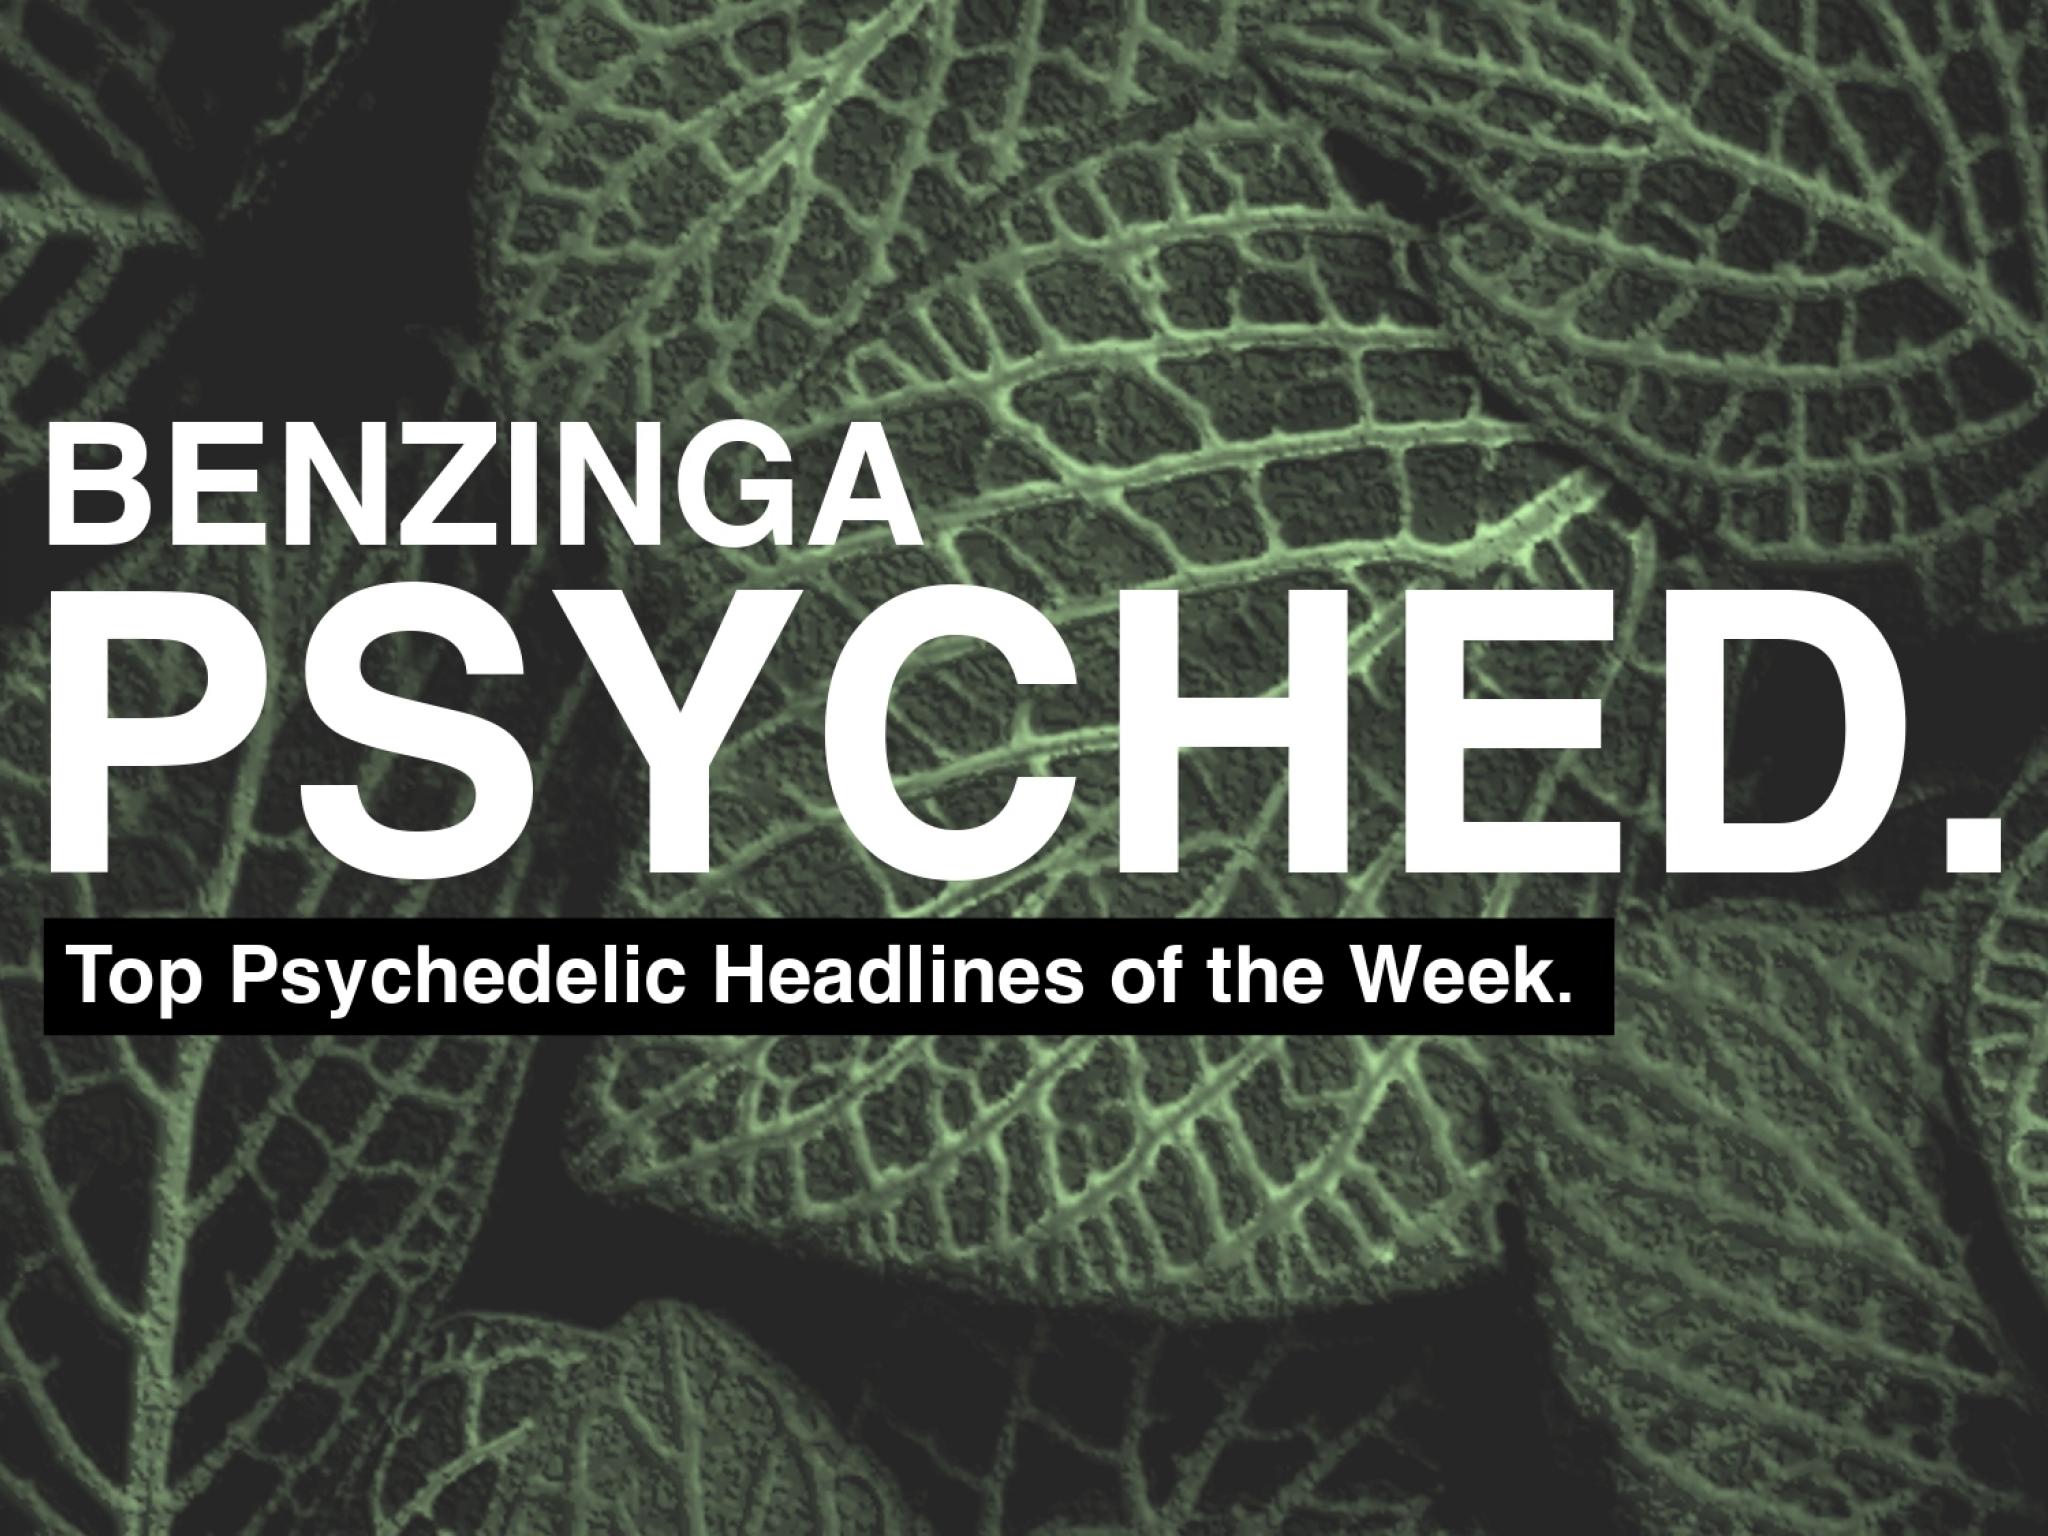  psychedelics-headlines-magic-mushrooms-for-sexual-wellbeing-the-deas-stance-the-therapists-role--more 